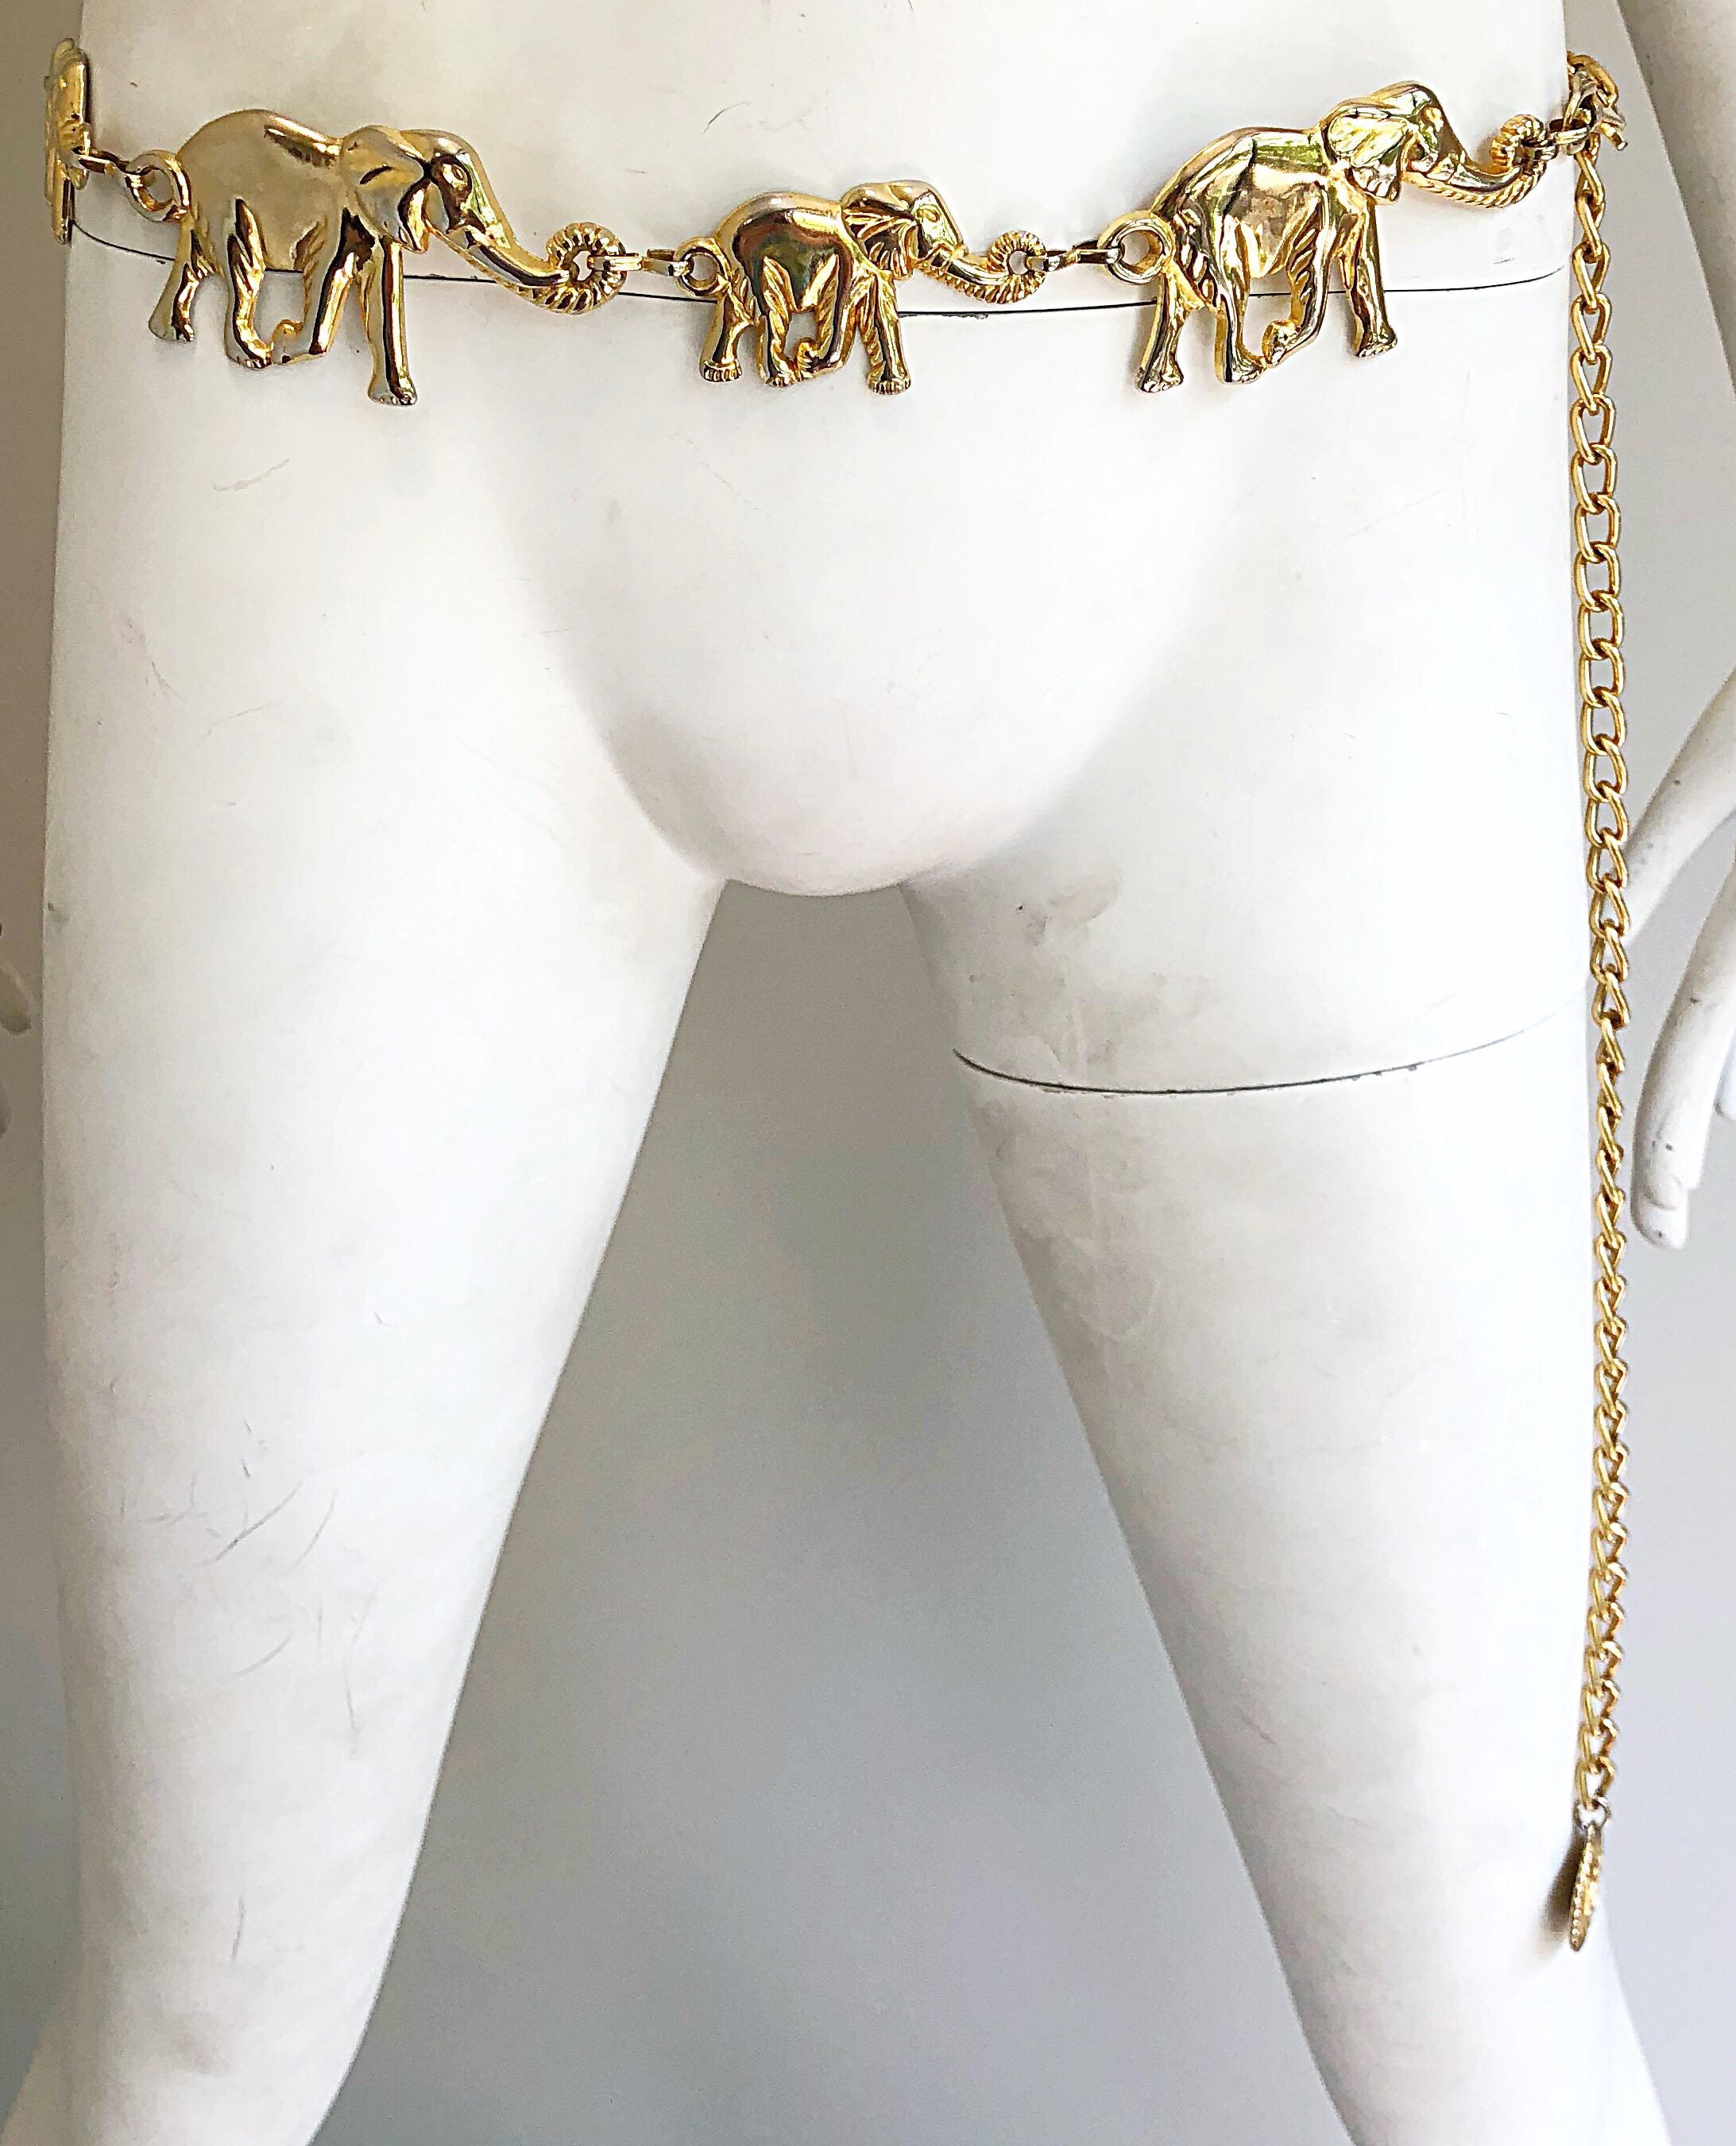 Amazing 1990s Gold Metal Elephant Novelty Vintage 90s Chain Bold Belt / Neclace For Sale 1